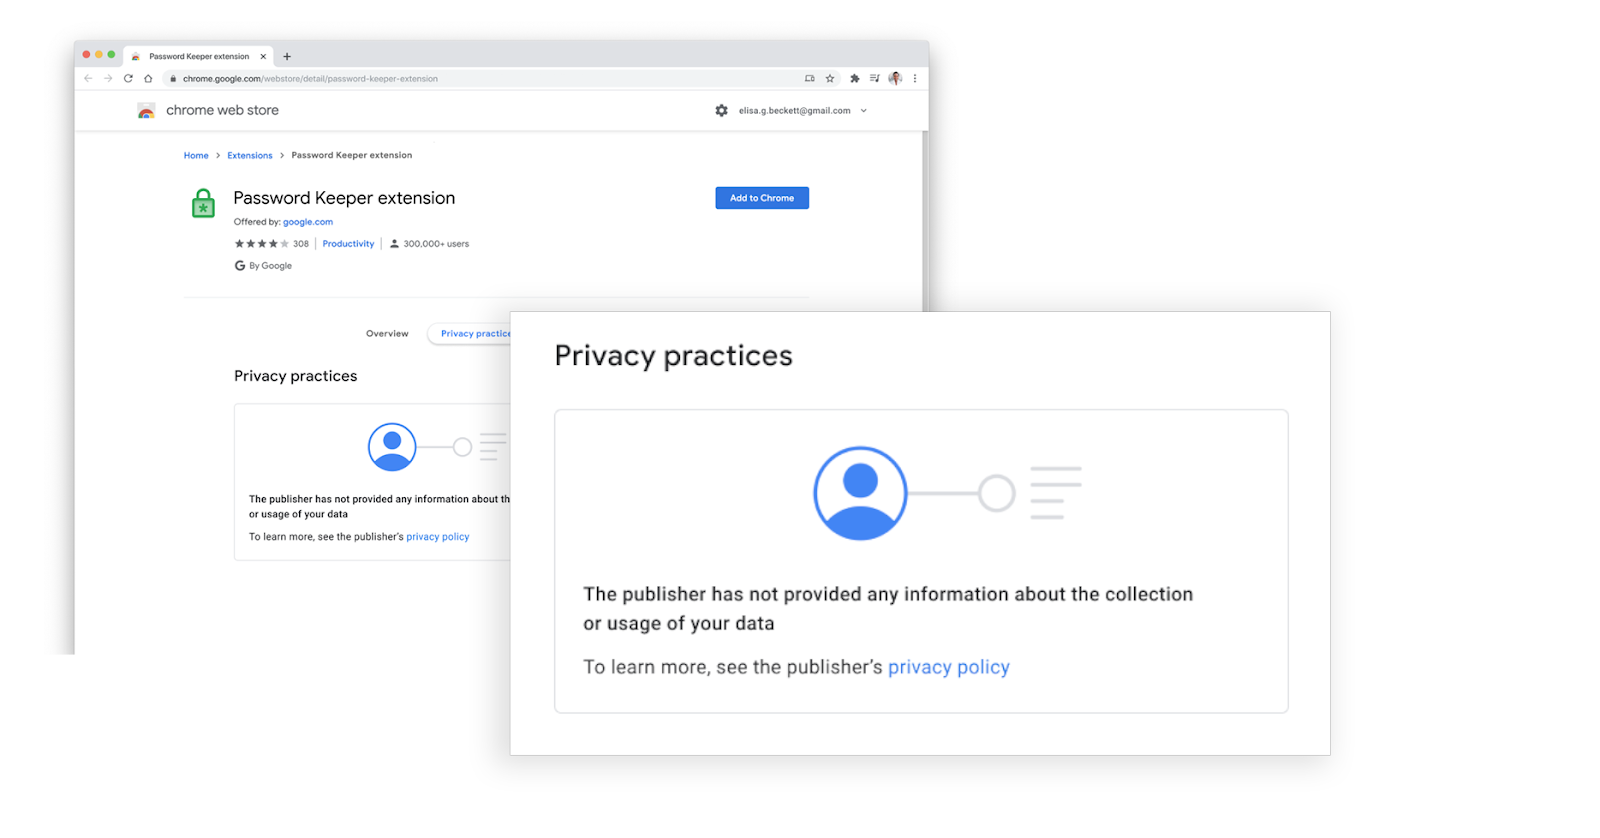 Transparent privacy practices for Chrome Extensions